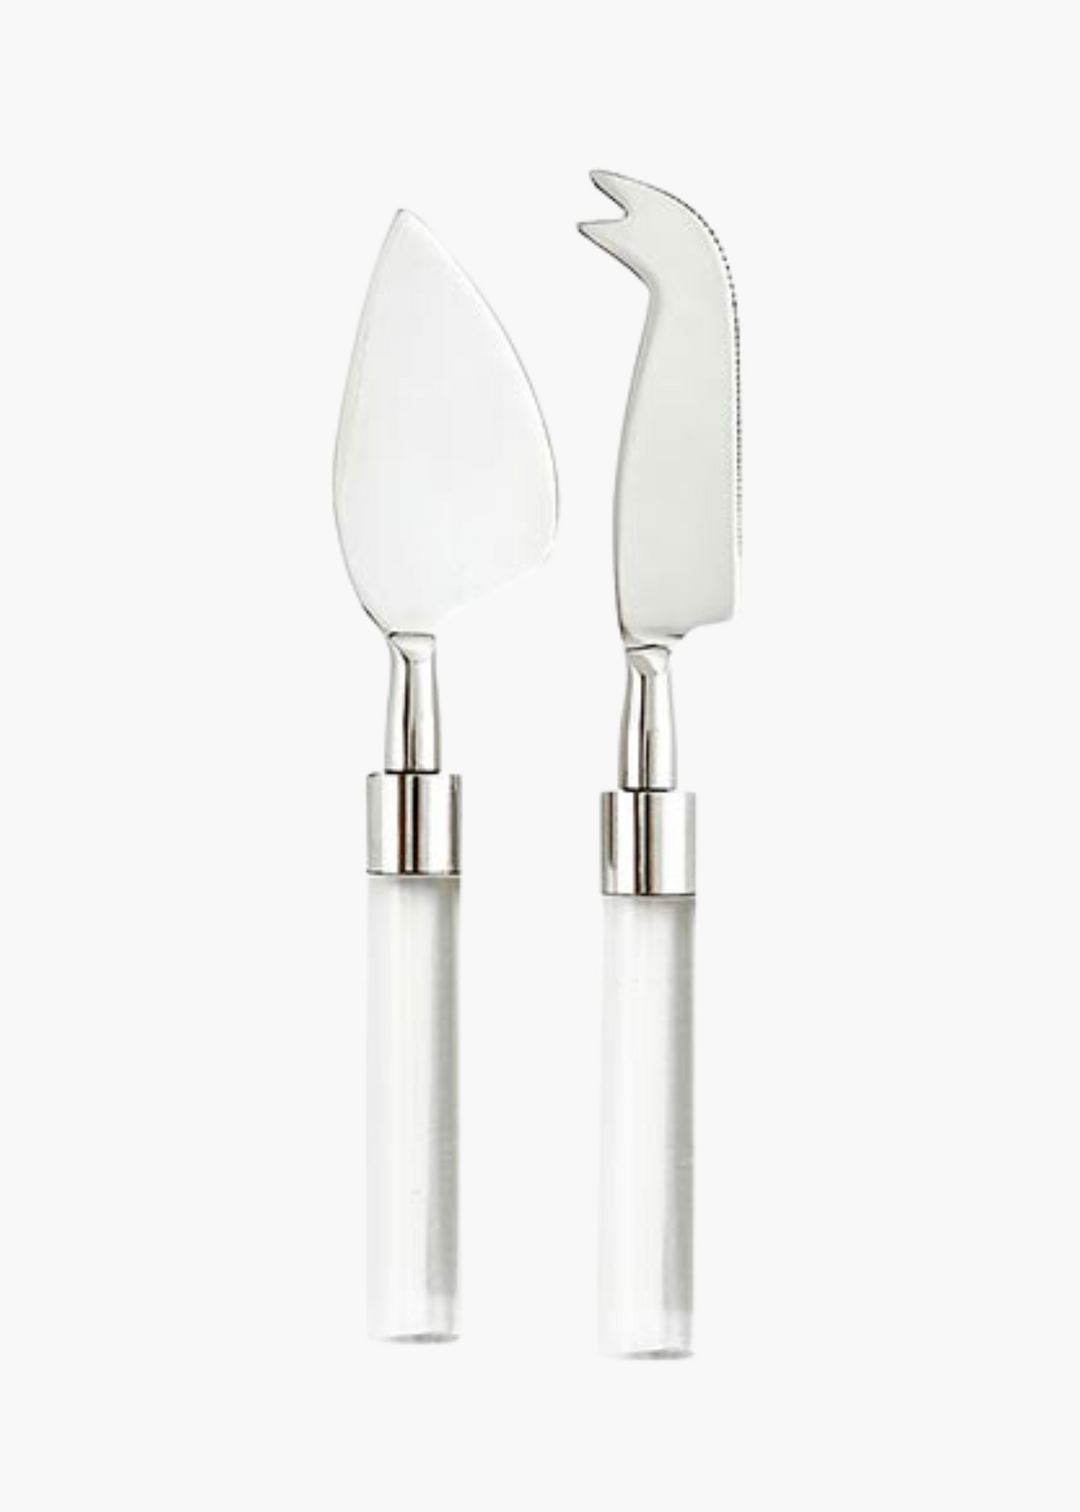 Lucite Cheese Knife